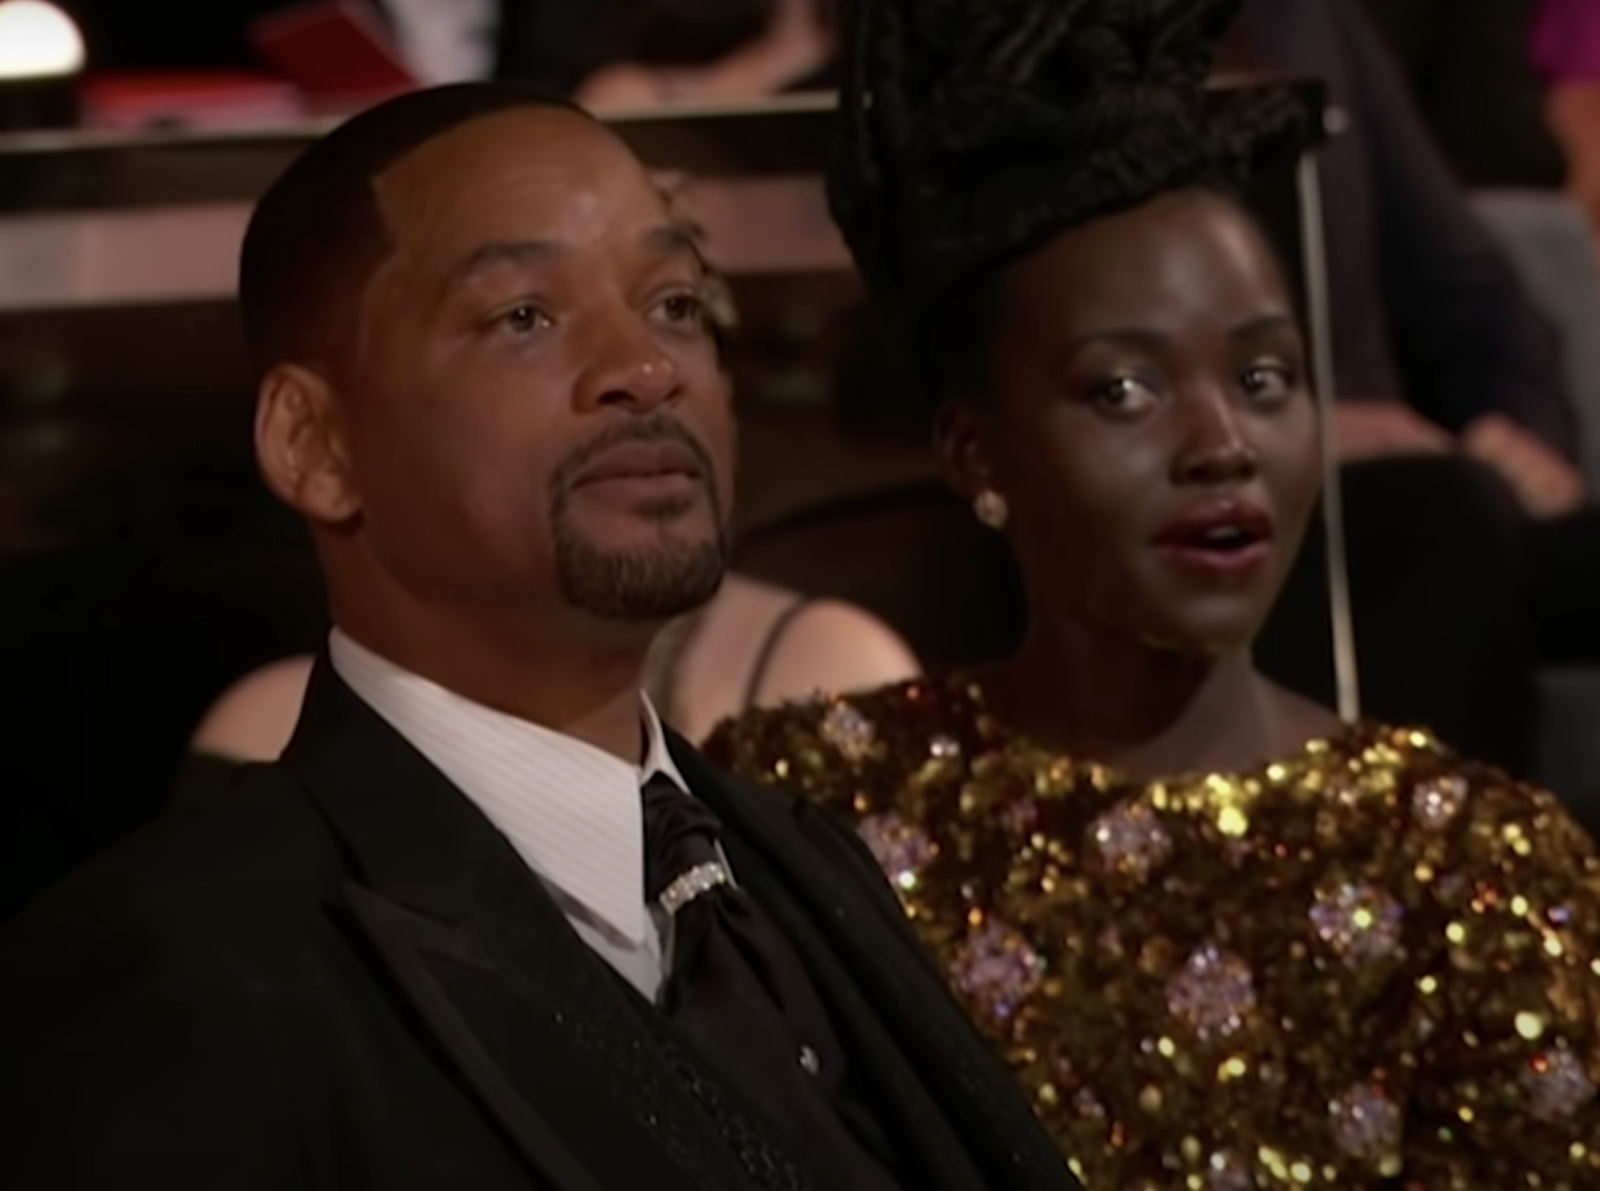 &#8216;Choose chaos&#8217; &#8211; Will Smith&#8217;s self-fulfilling statement hours before Oscars slap, The Manc